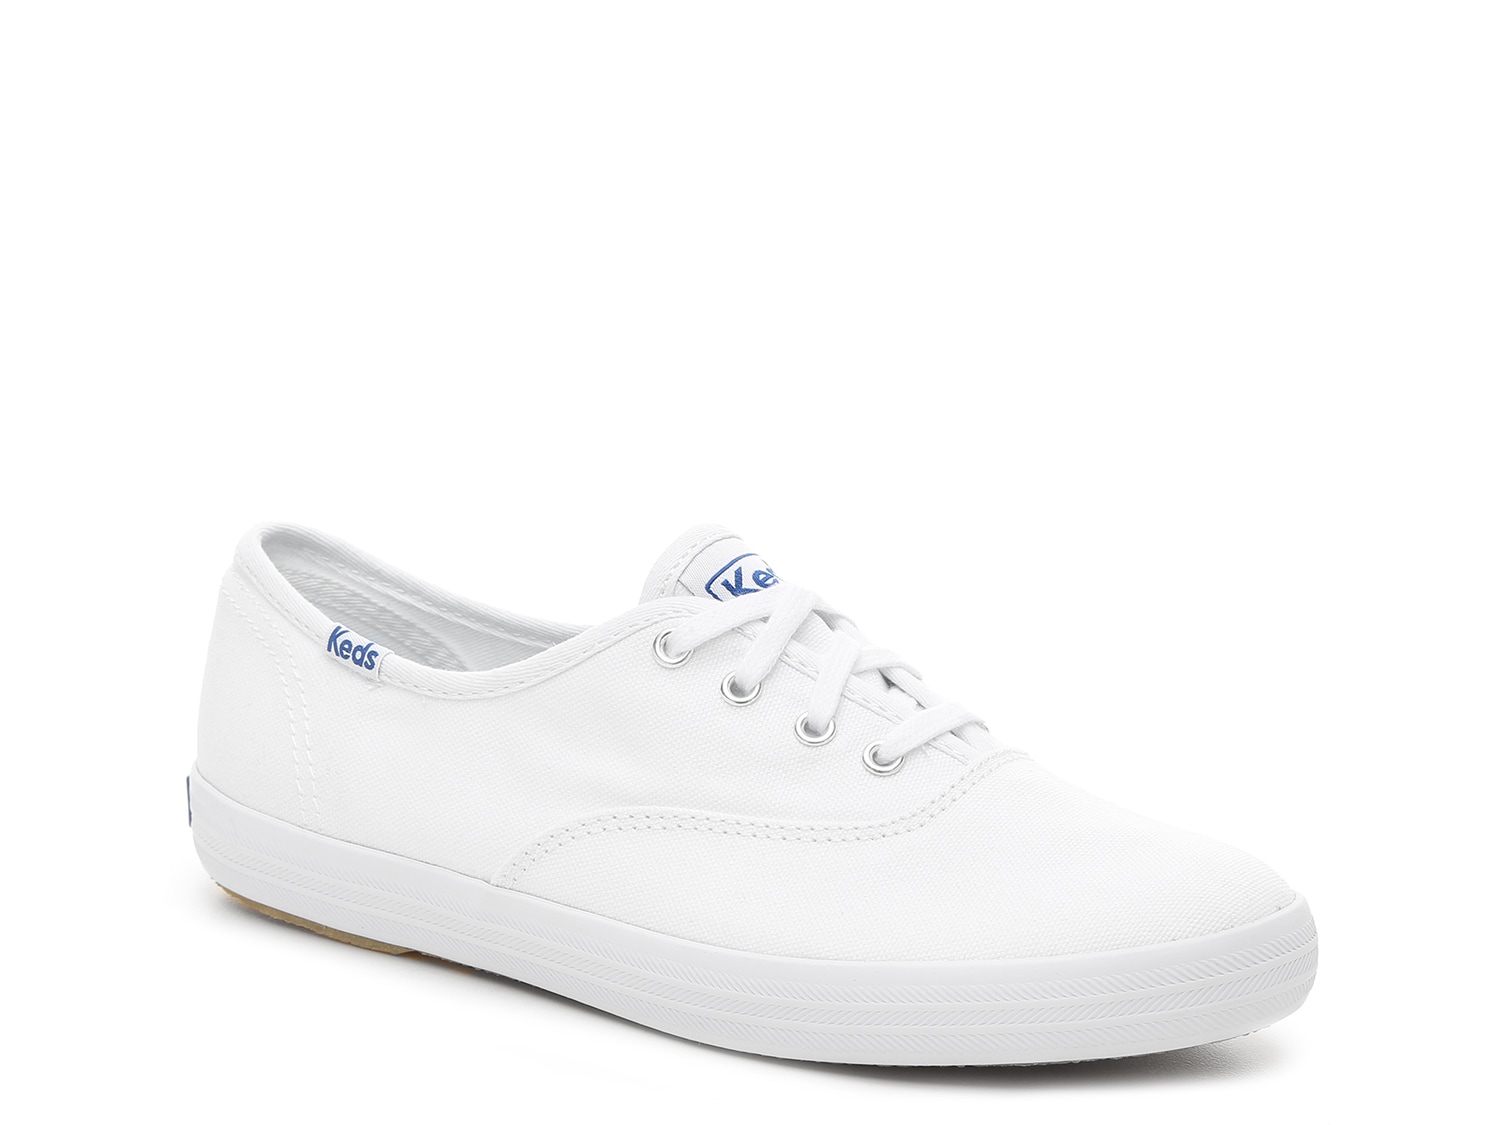 keds champion women's leather oxford shoes